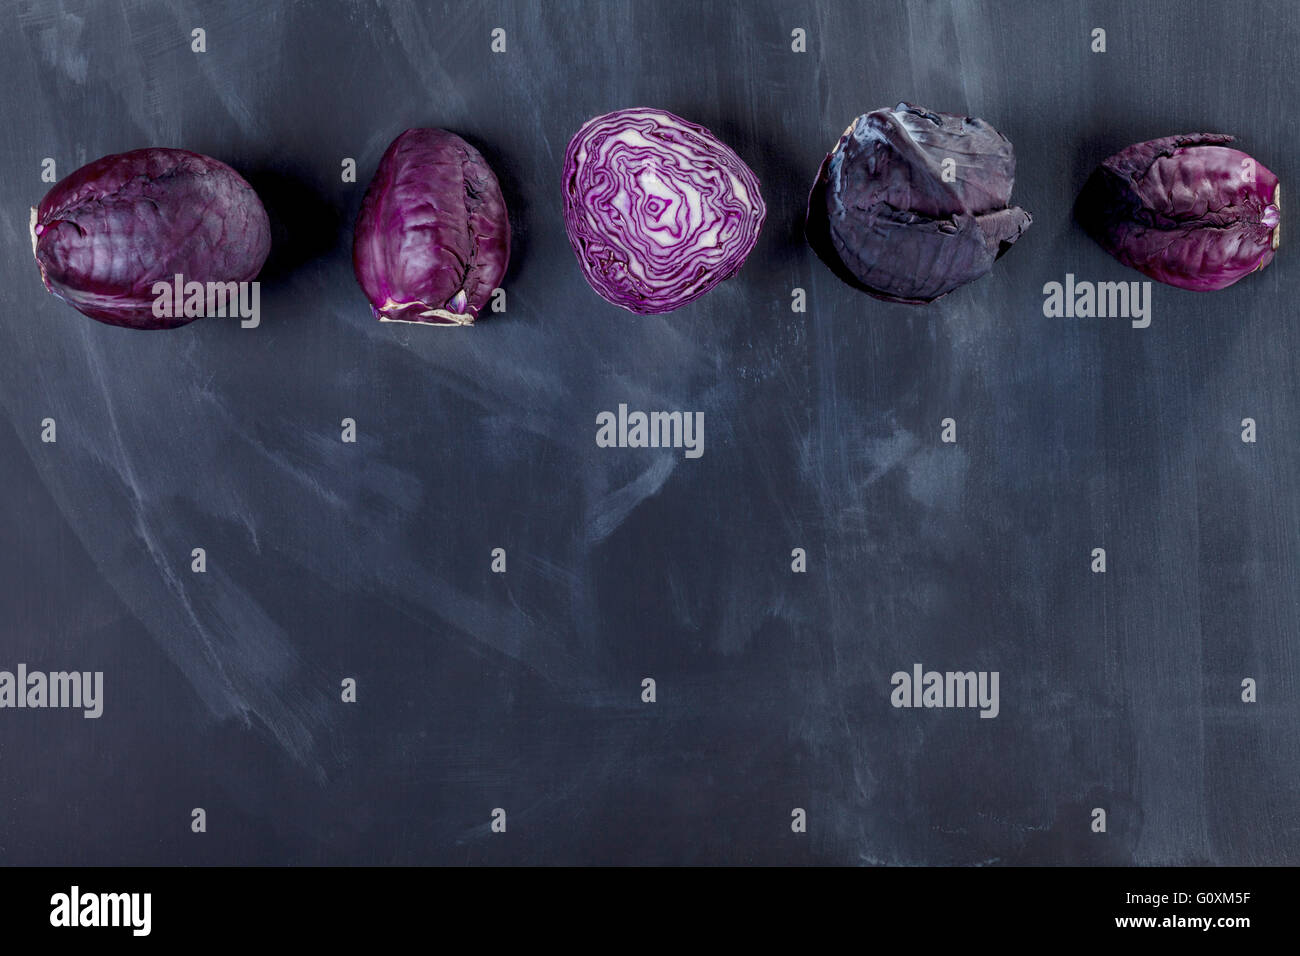 Red cabbages on the top of blackboard Stock Photo